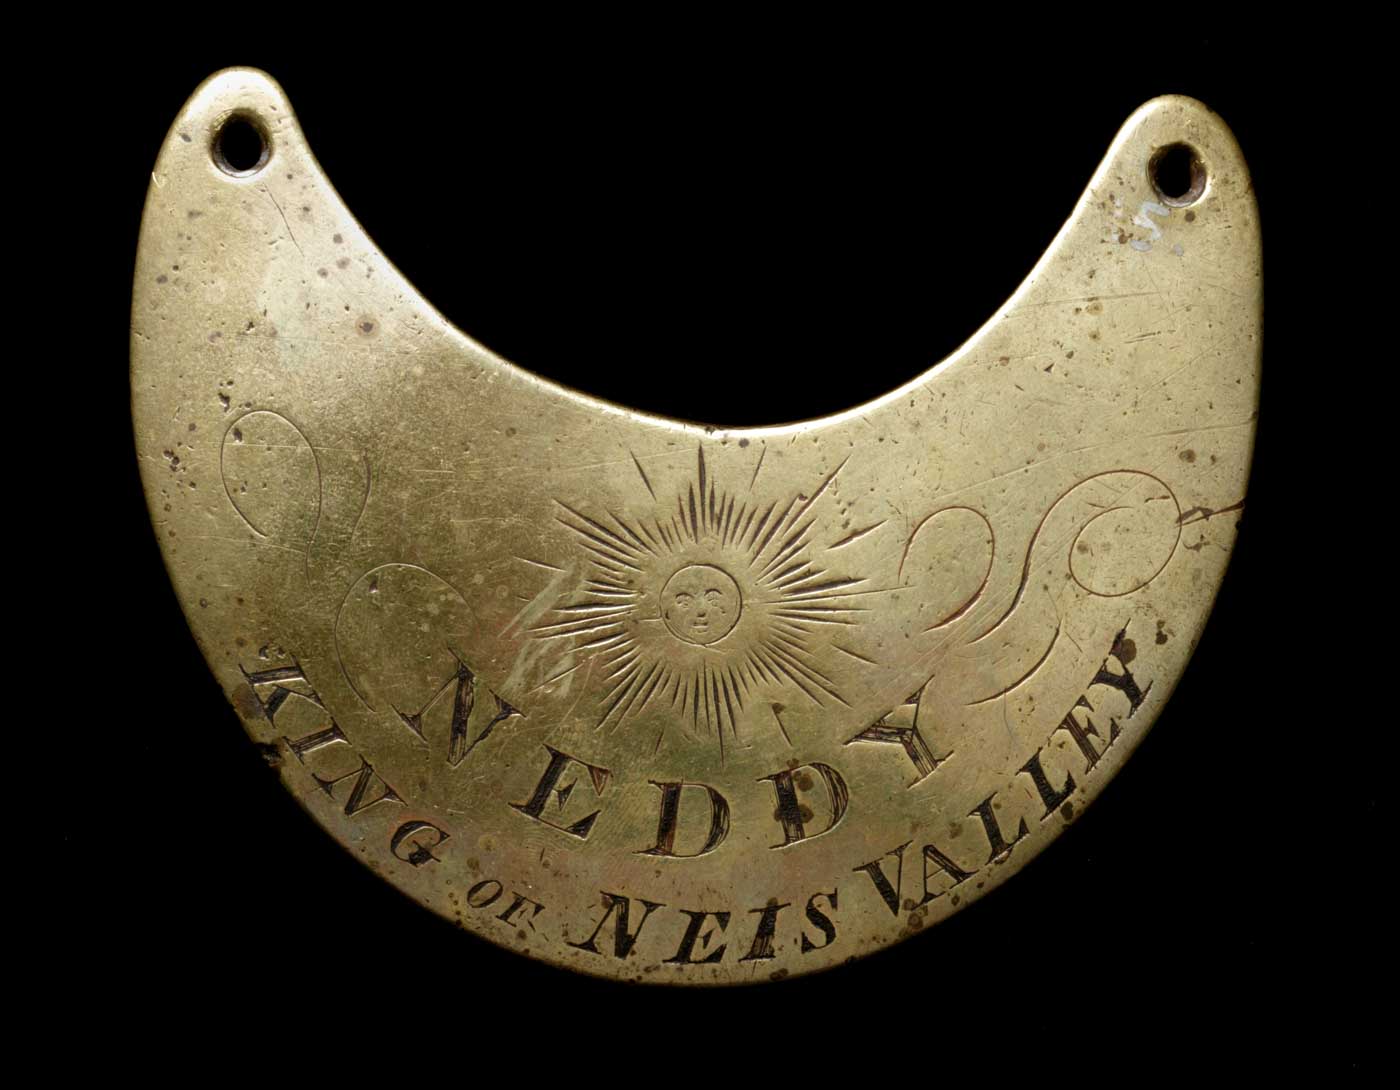 Engraved breastplate with an image of the sun engraved top centre.